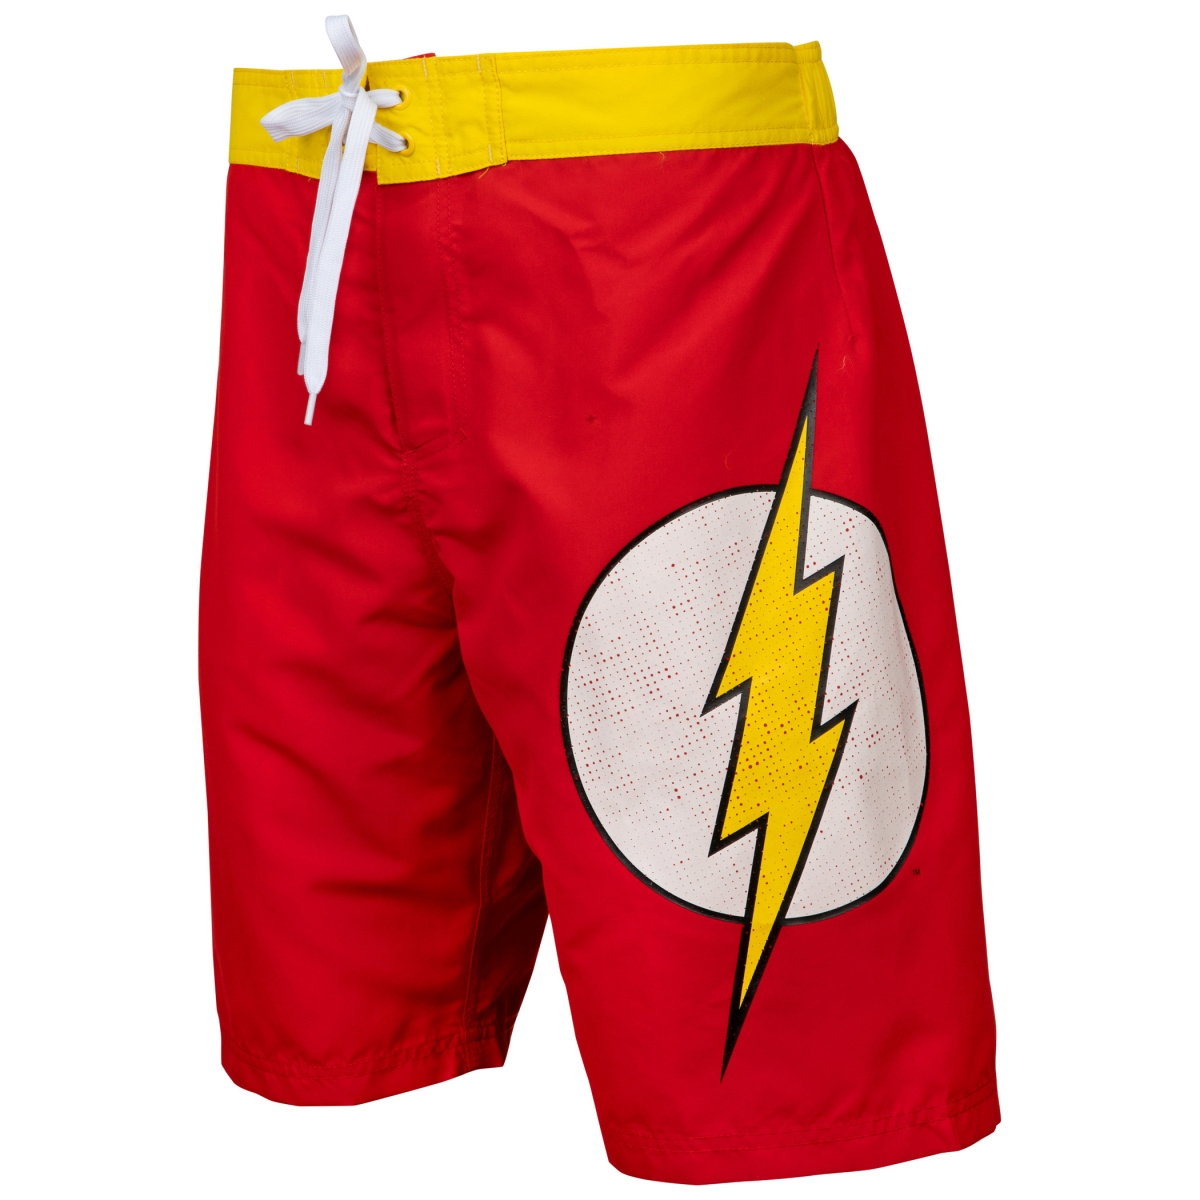 Picture of Flash 803503-large 36-38 Flash Symbol Board Shorts, Heather Red - Large 36-38